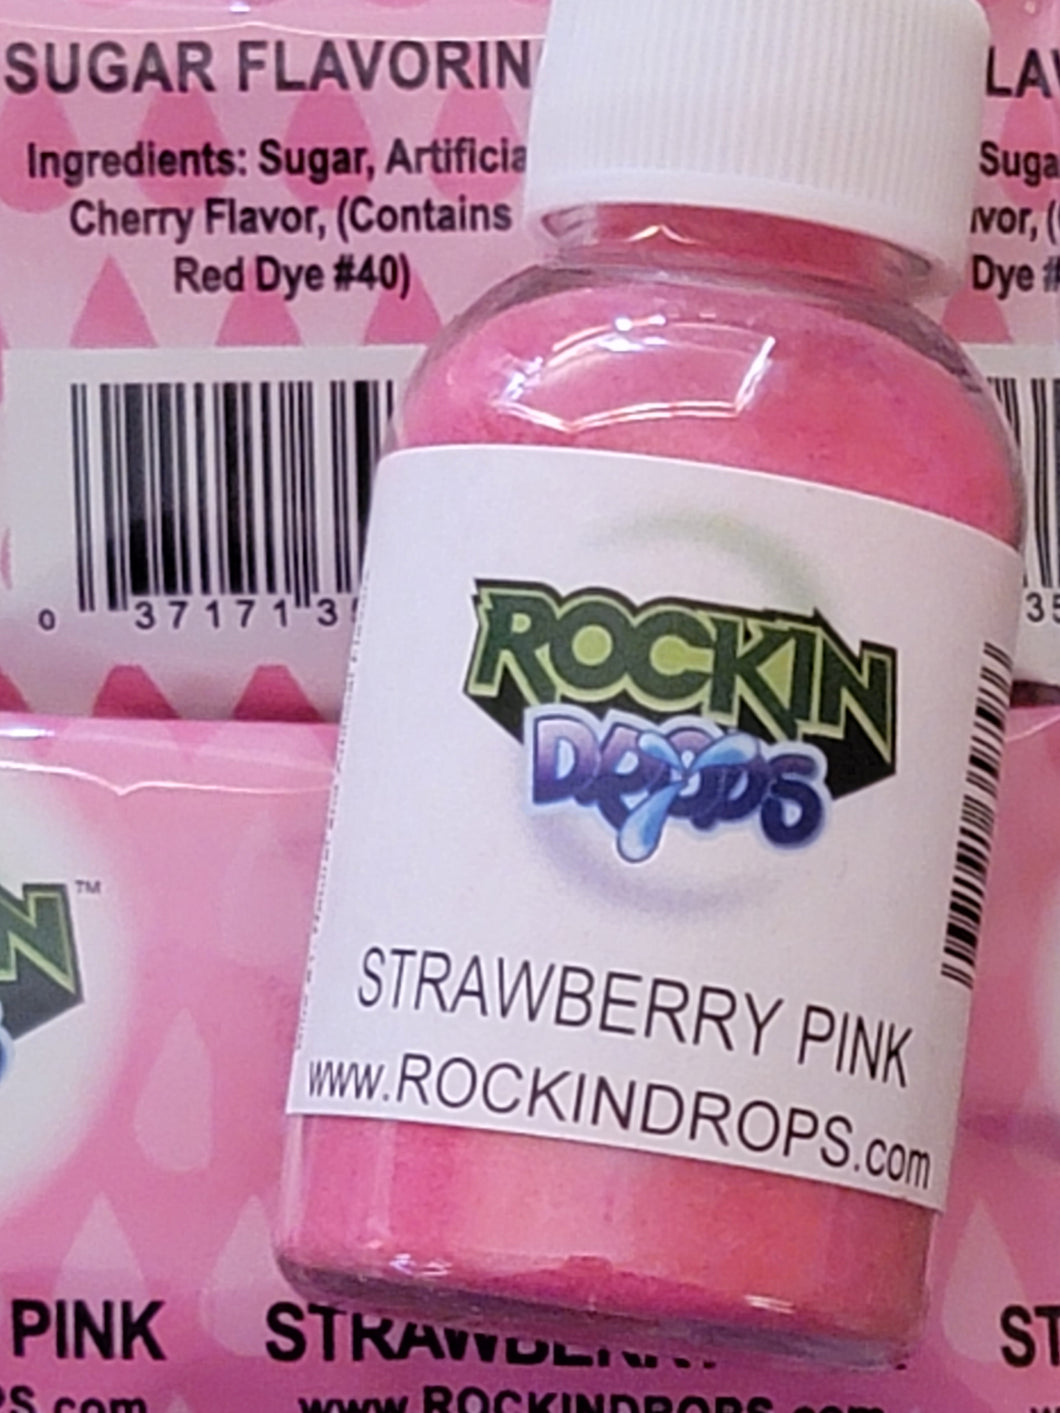 RockinDrops Concentrated Floss Sugar Flavoring - Strawberry Pink